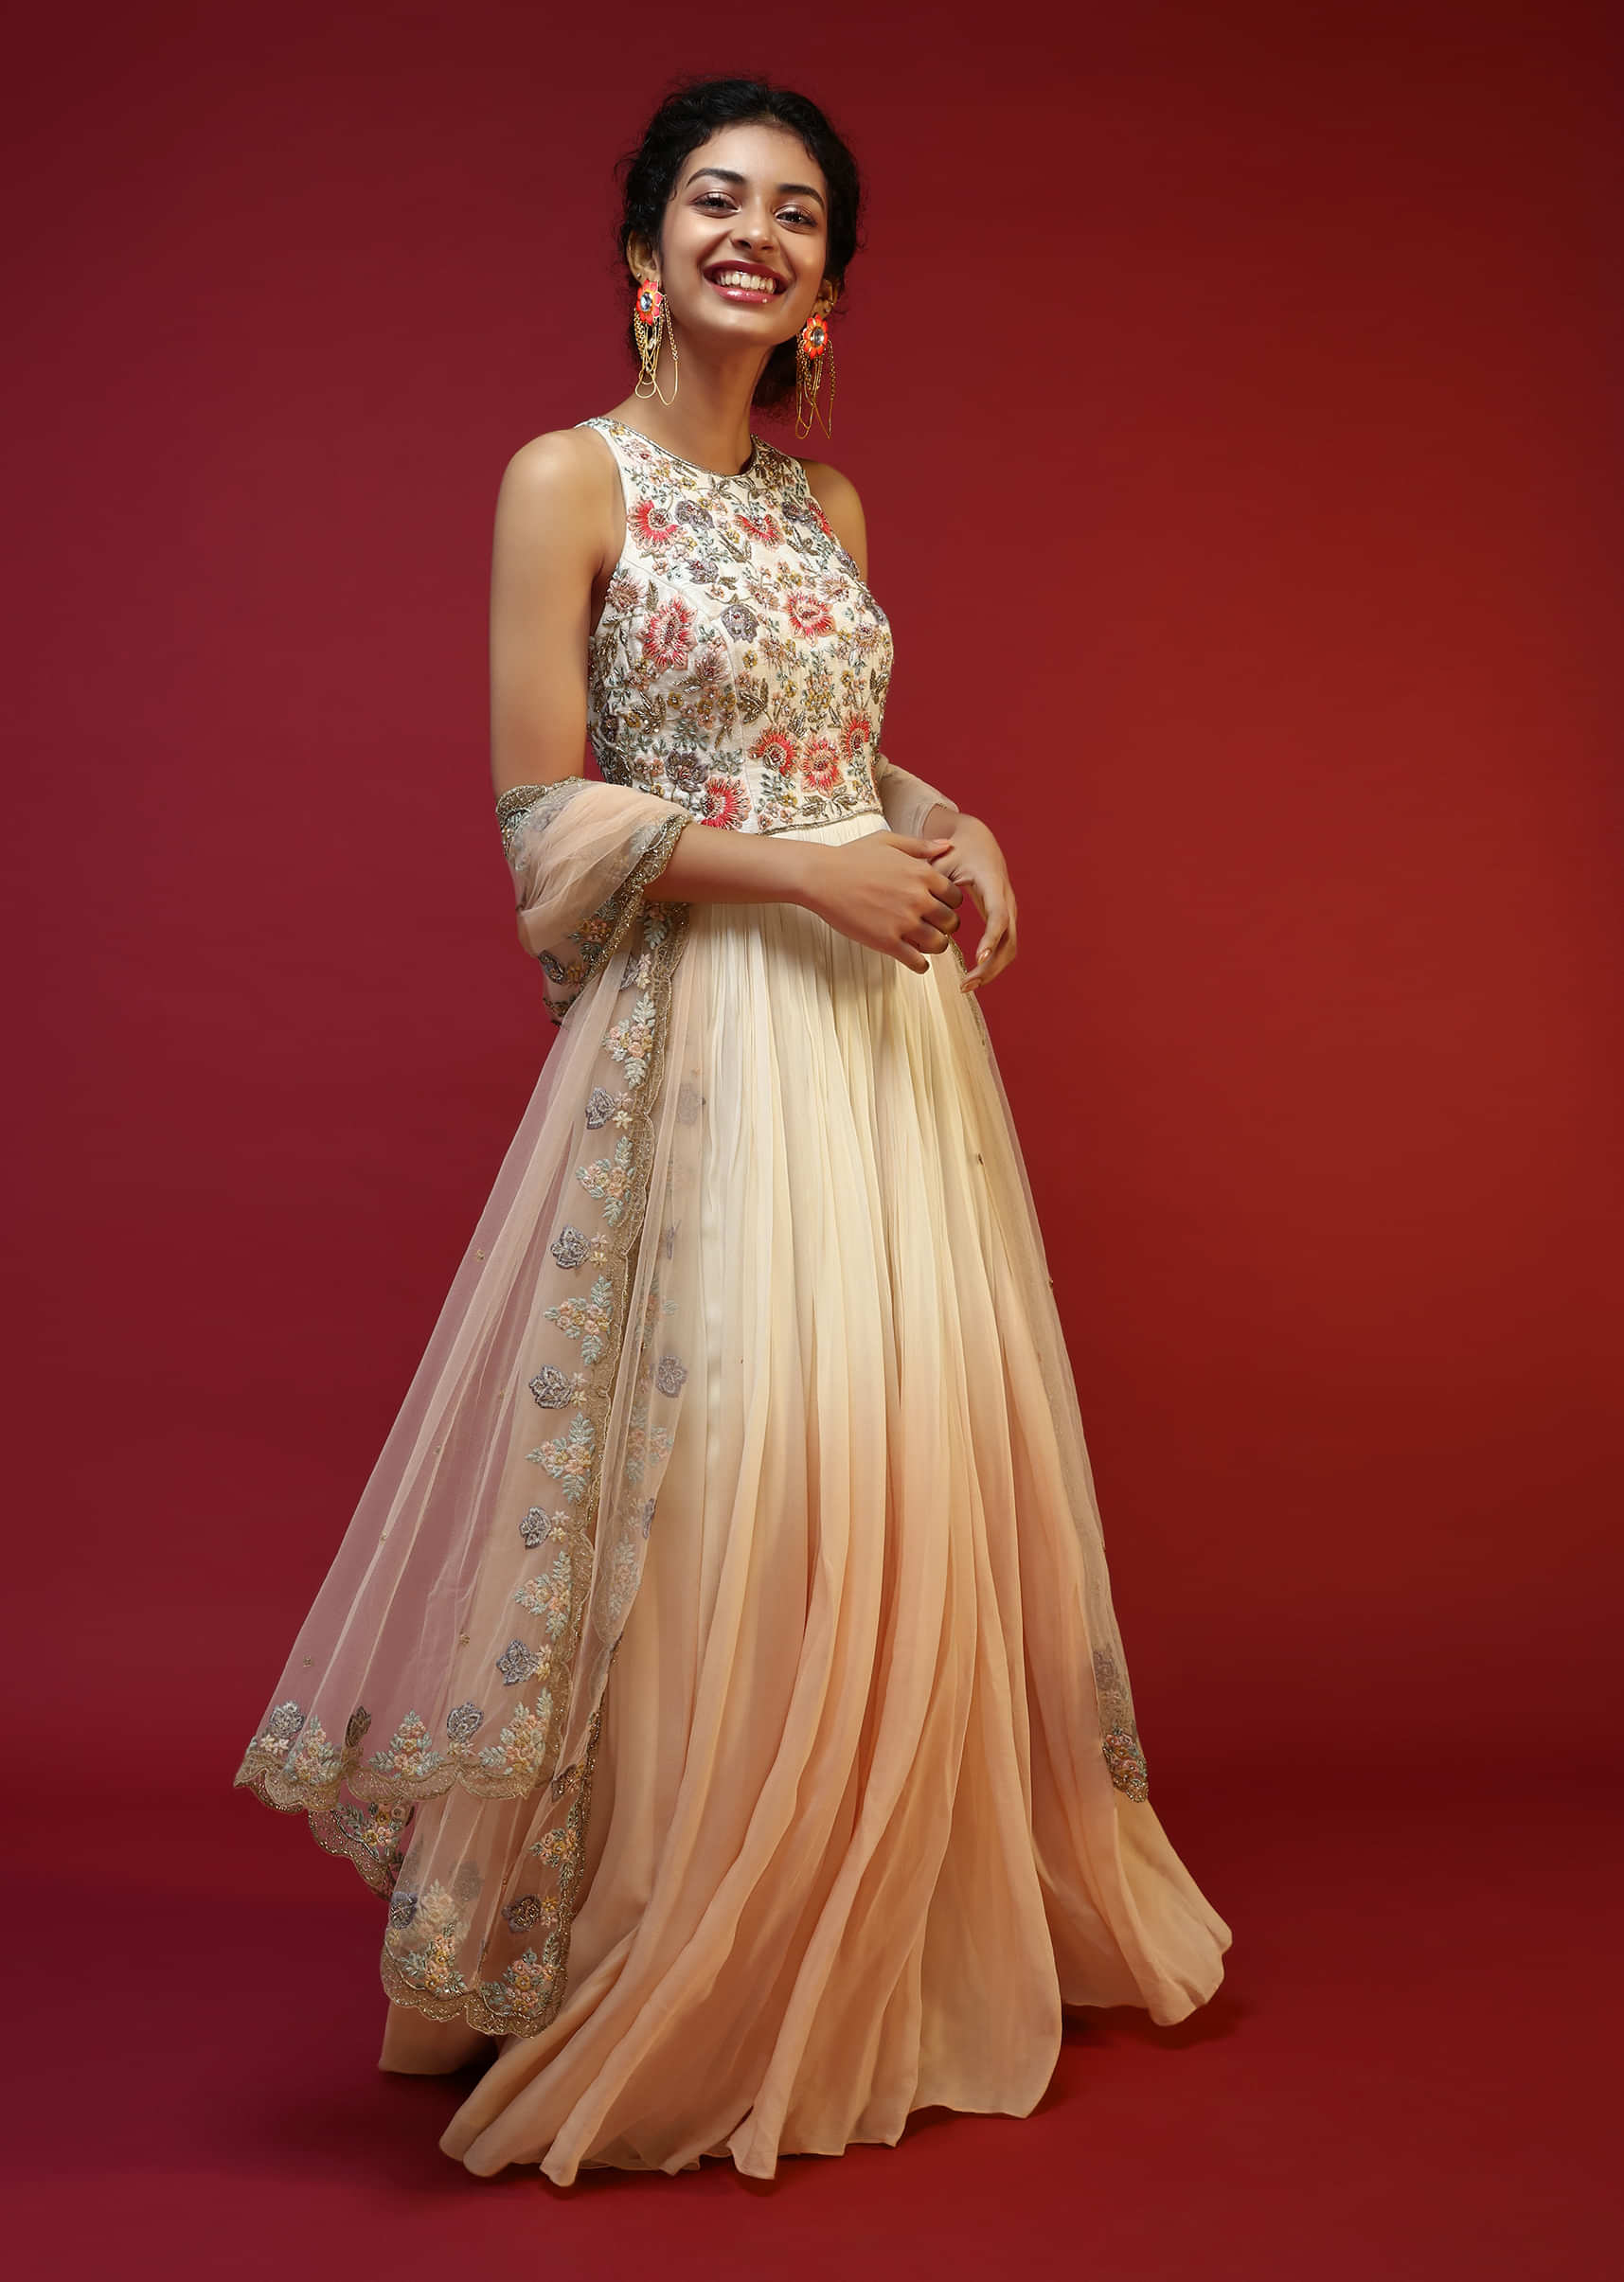 Off White Anarkali Suit With Halter Neckline And Adorned In Multicolored Hand Embroidered Floral Design On The Bodice  